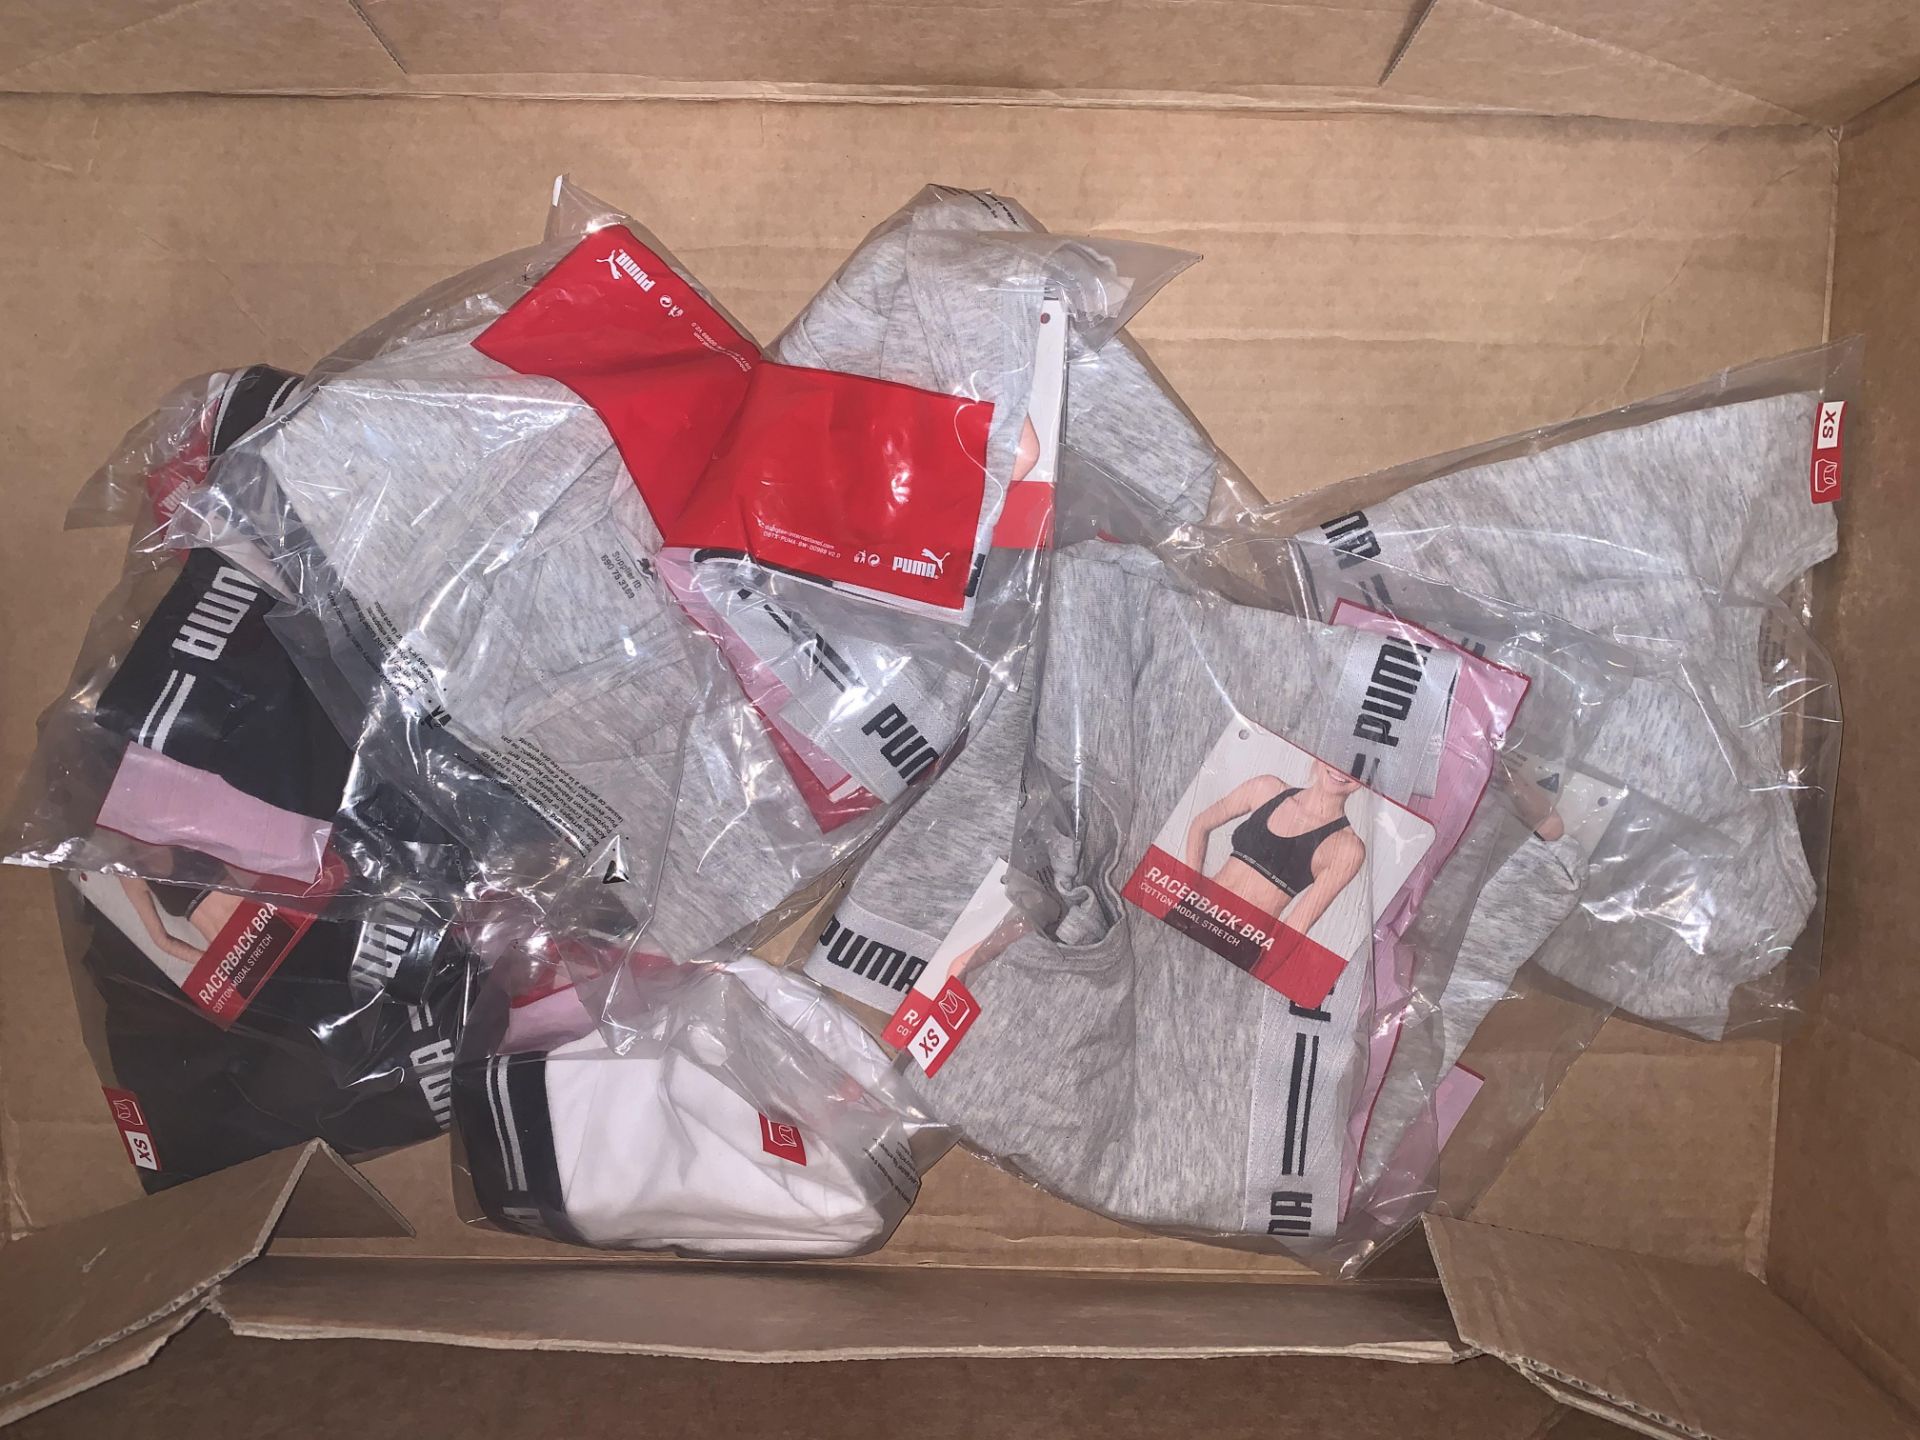 10 X BRAND NEW INDIVIDUALLY PACKAGED PUMA UNDERWEAR IN VARIOUS STYLES AND SIZES